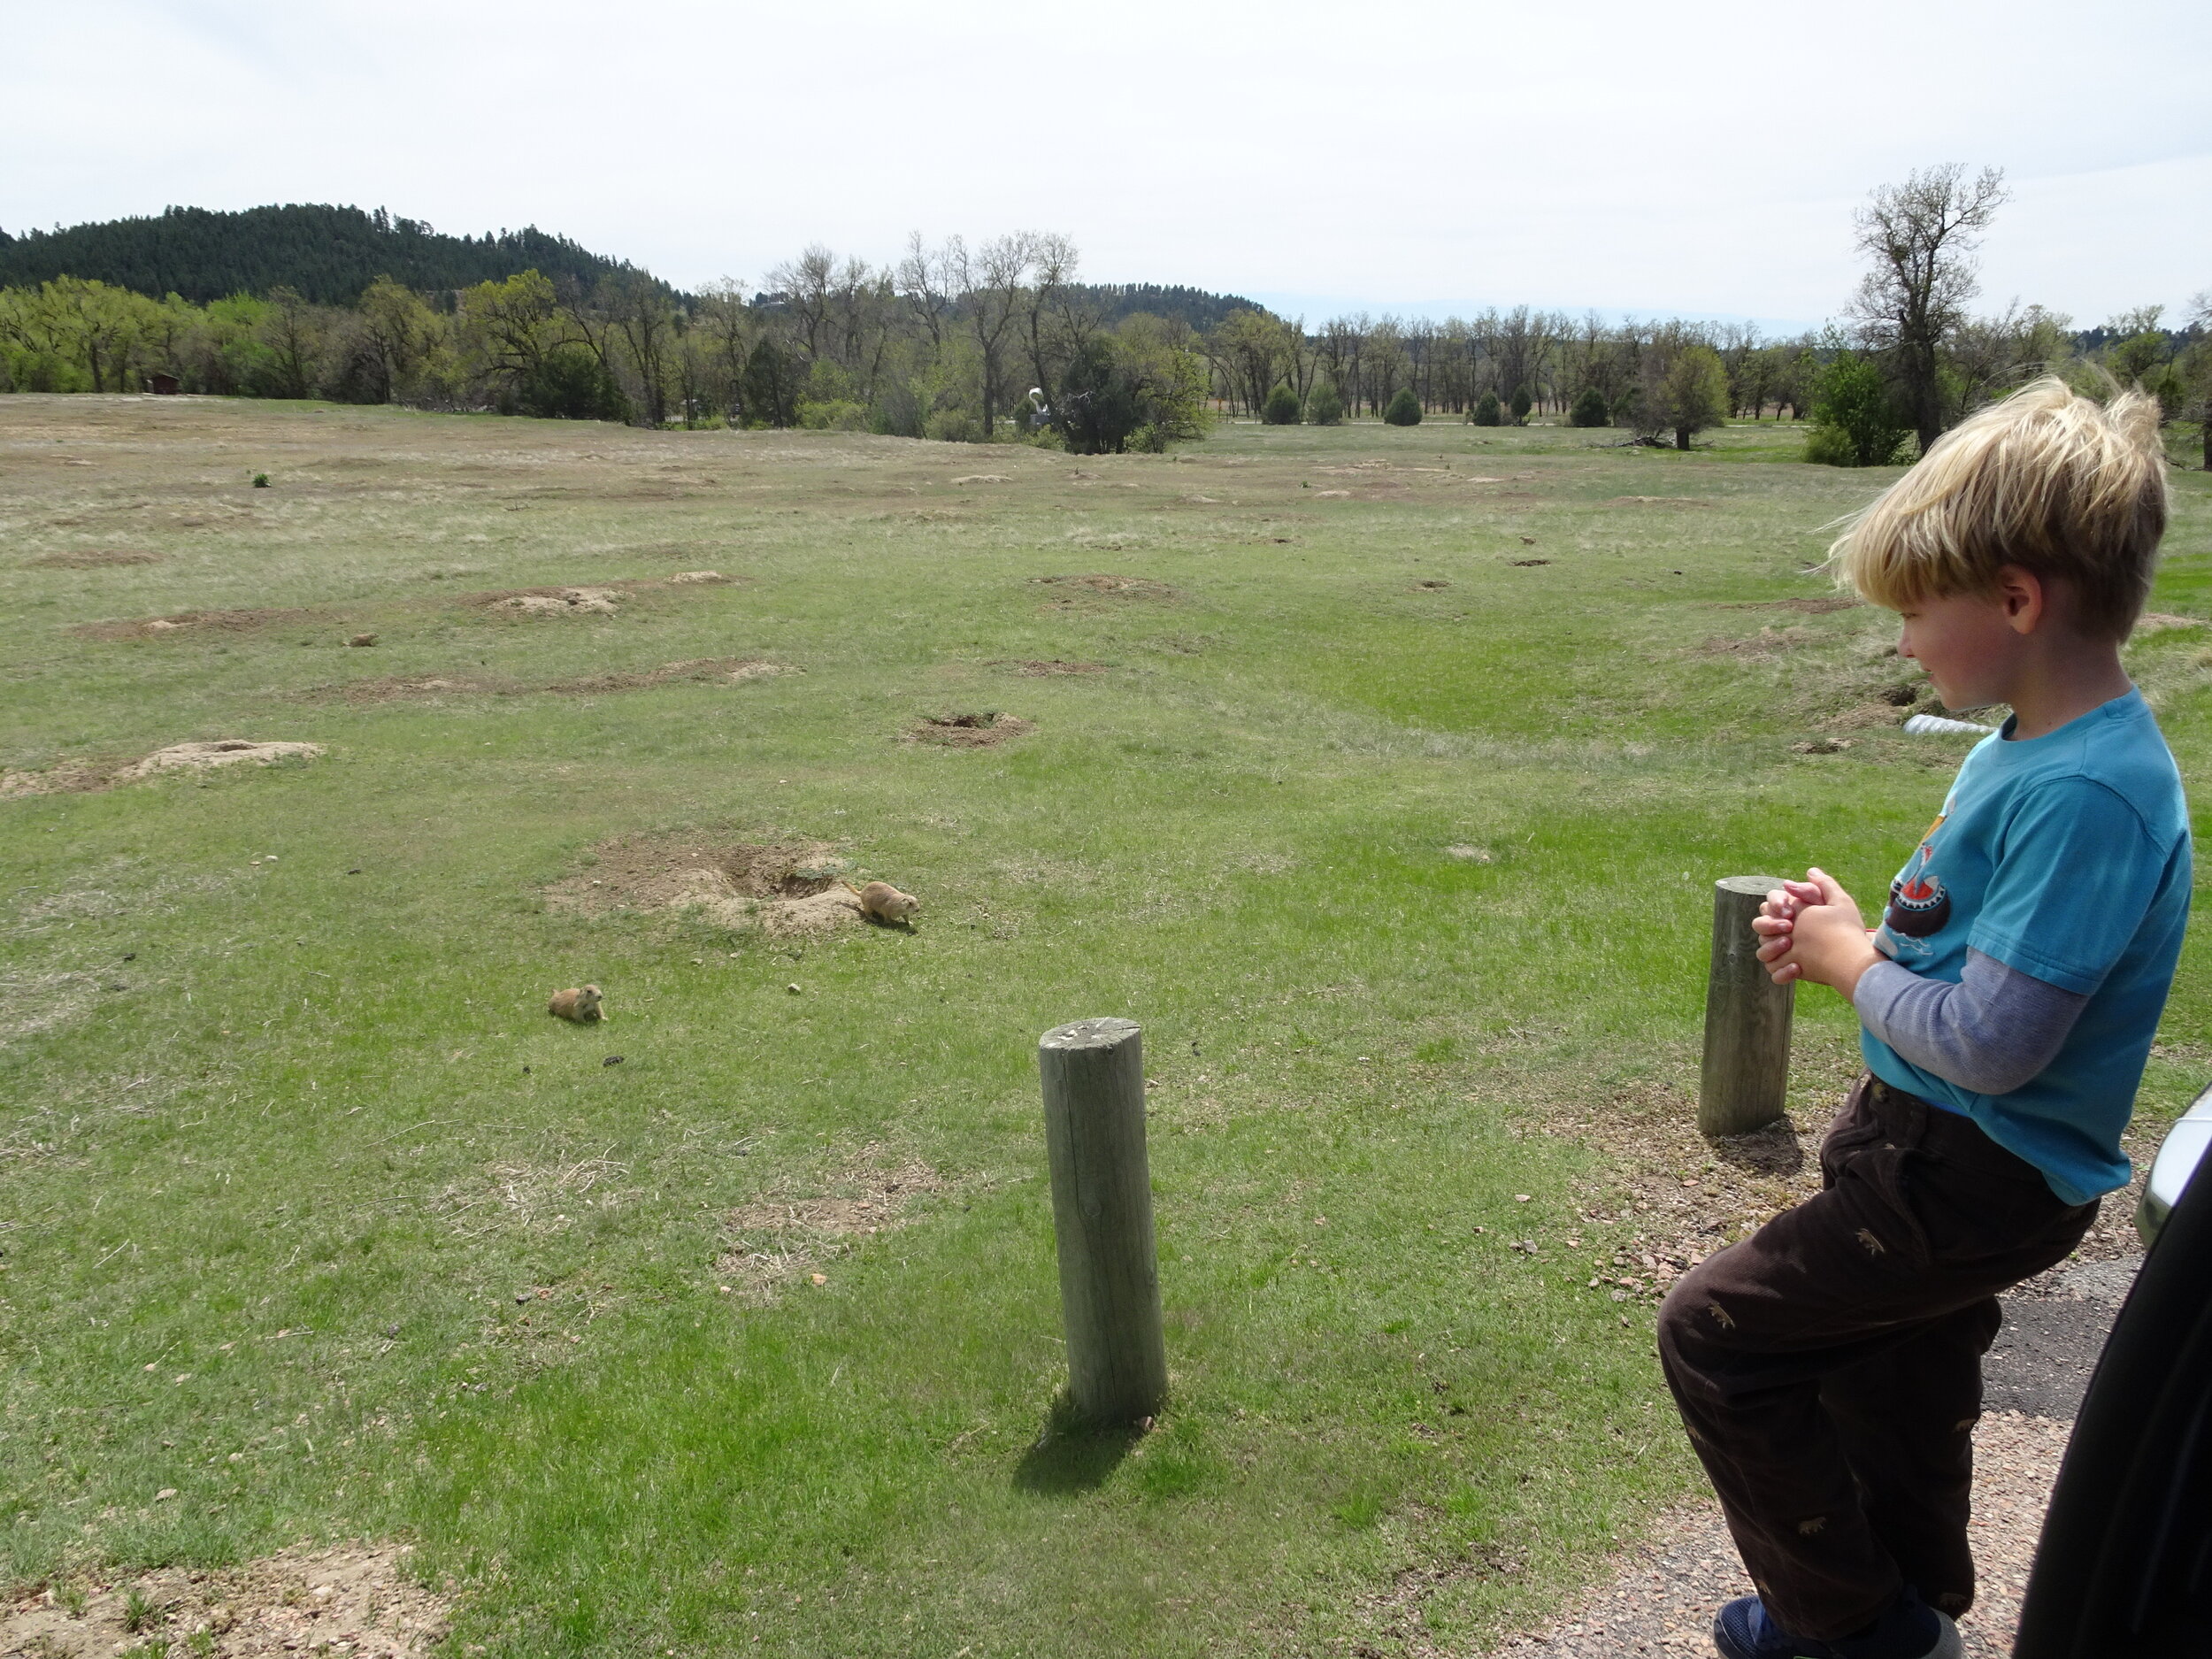 Popcorn loves prairie dogs and little rodents.  He calls them “[his] people”.  Photo by Karen Boudreaux, May 28, 2021